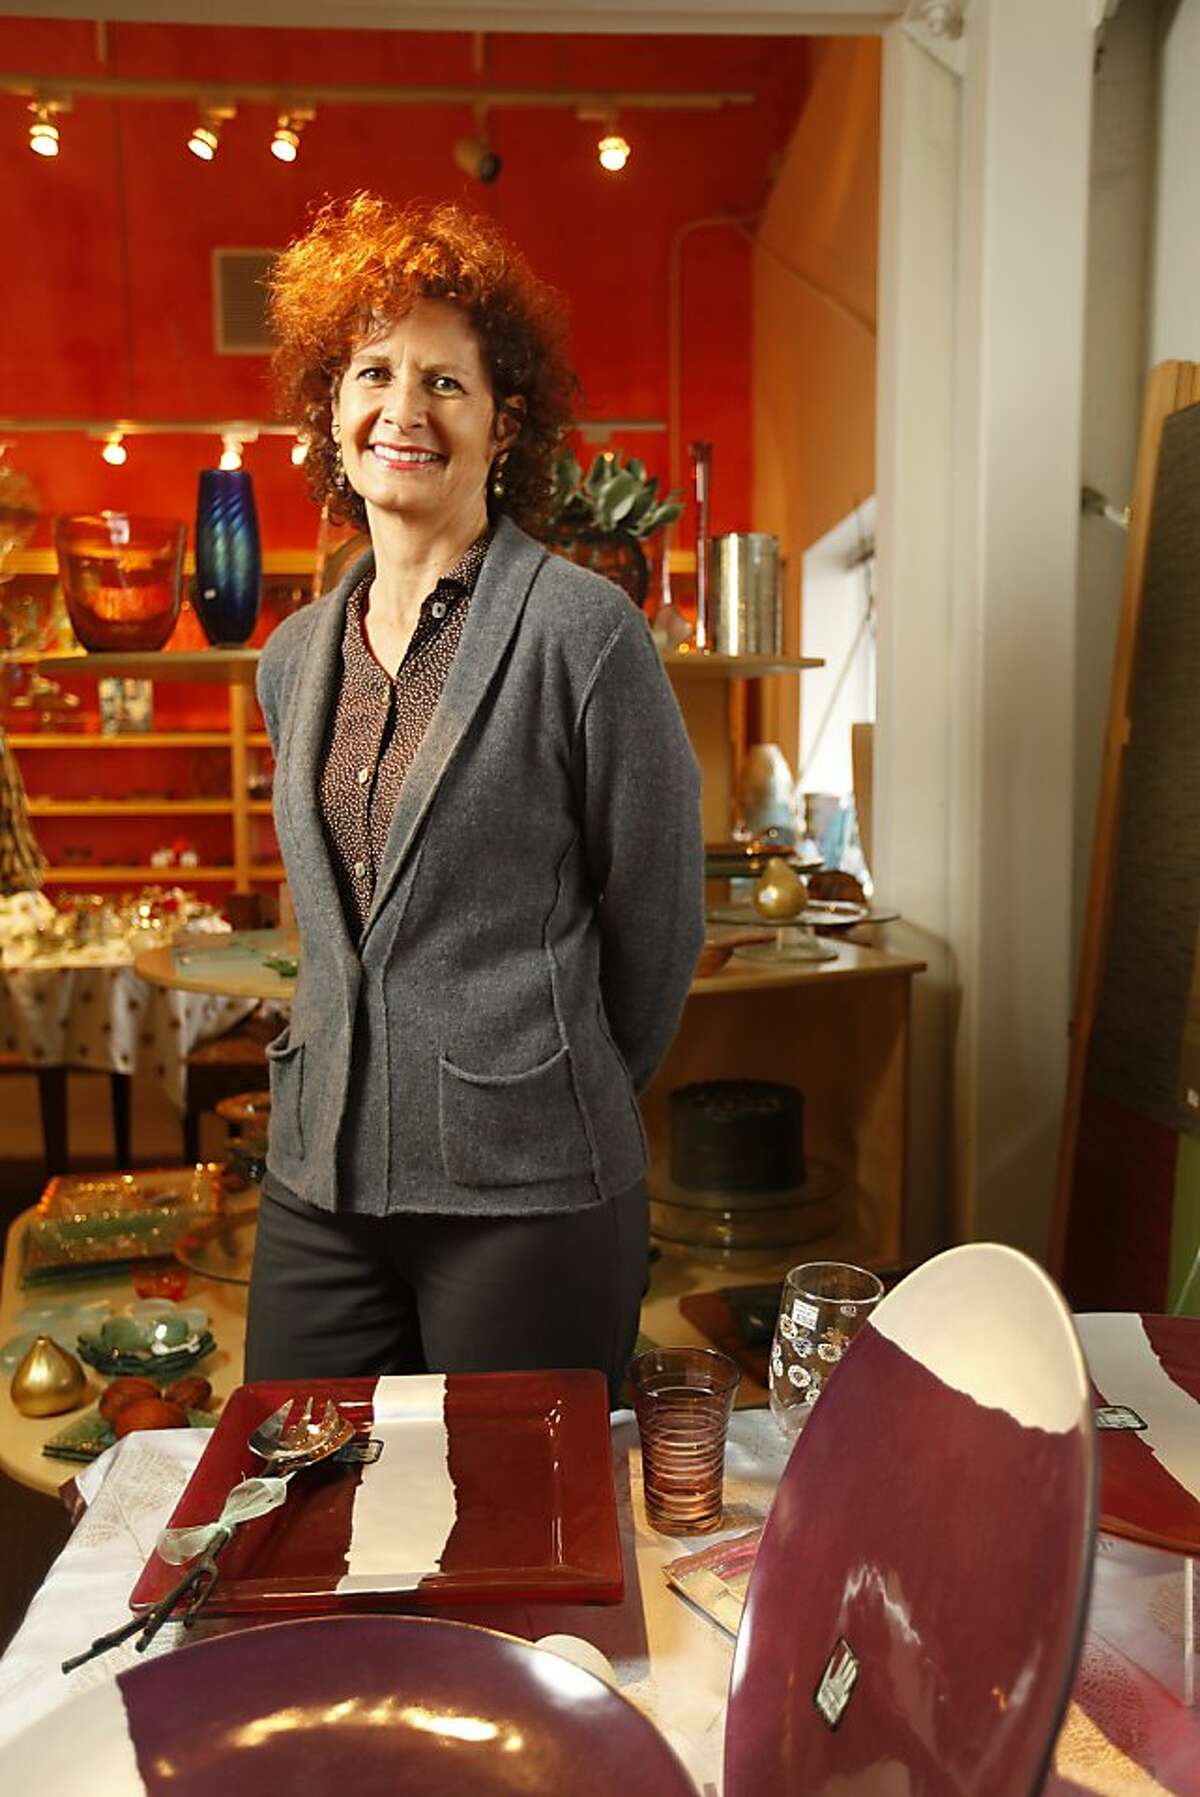 Annie Morhauser, owner of AnnieGlass in Watsonville, California on Thursday, November 8, 2012.